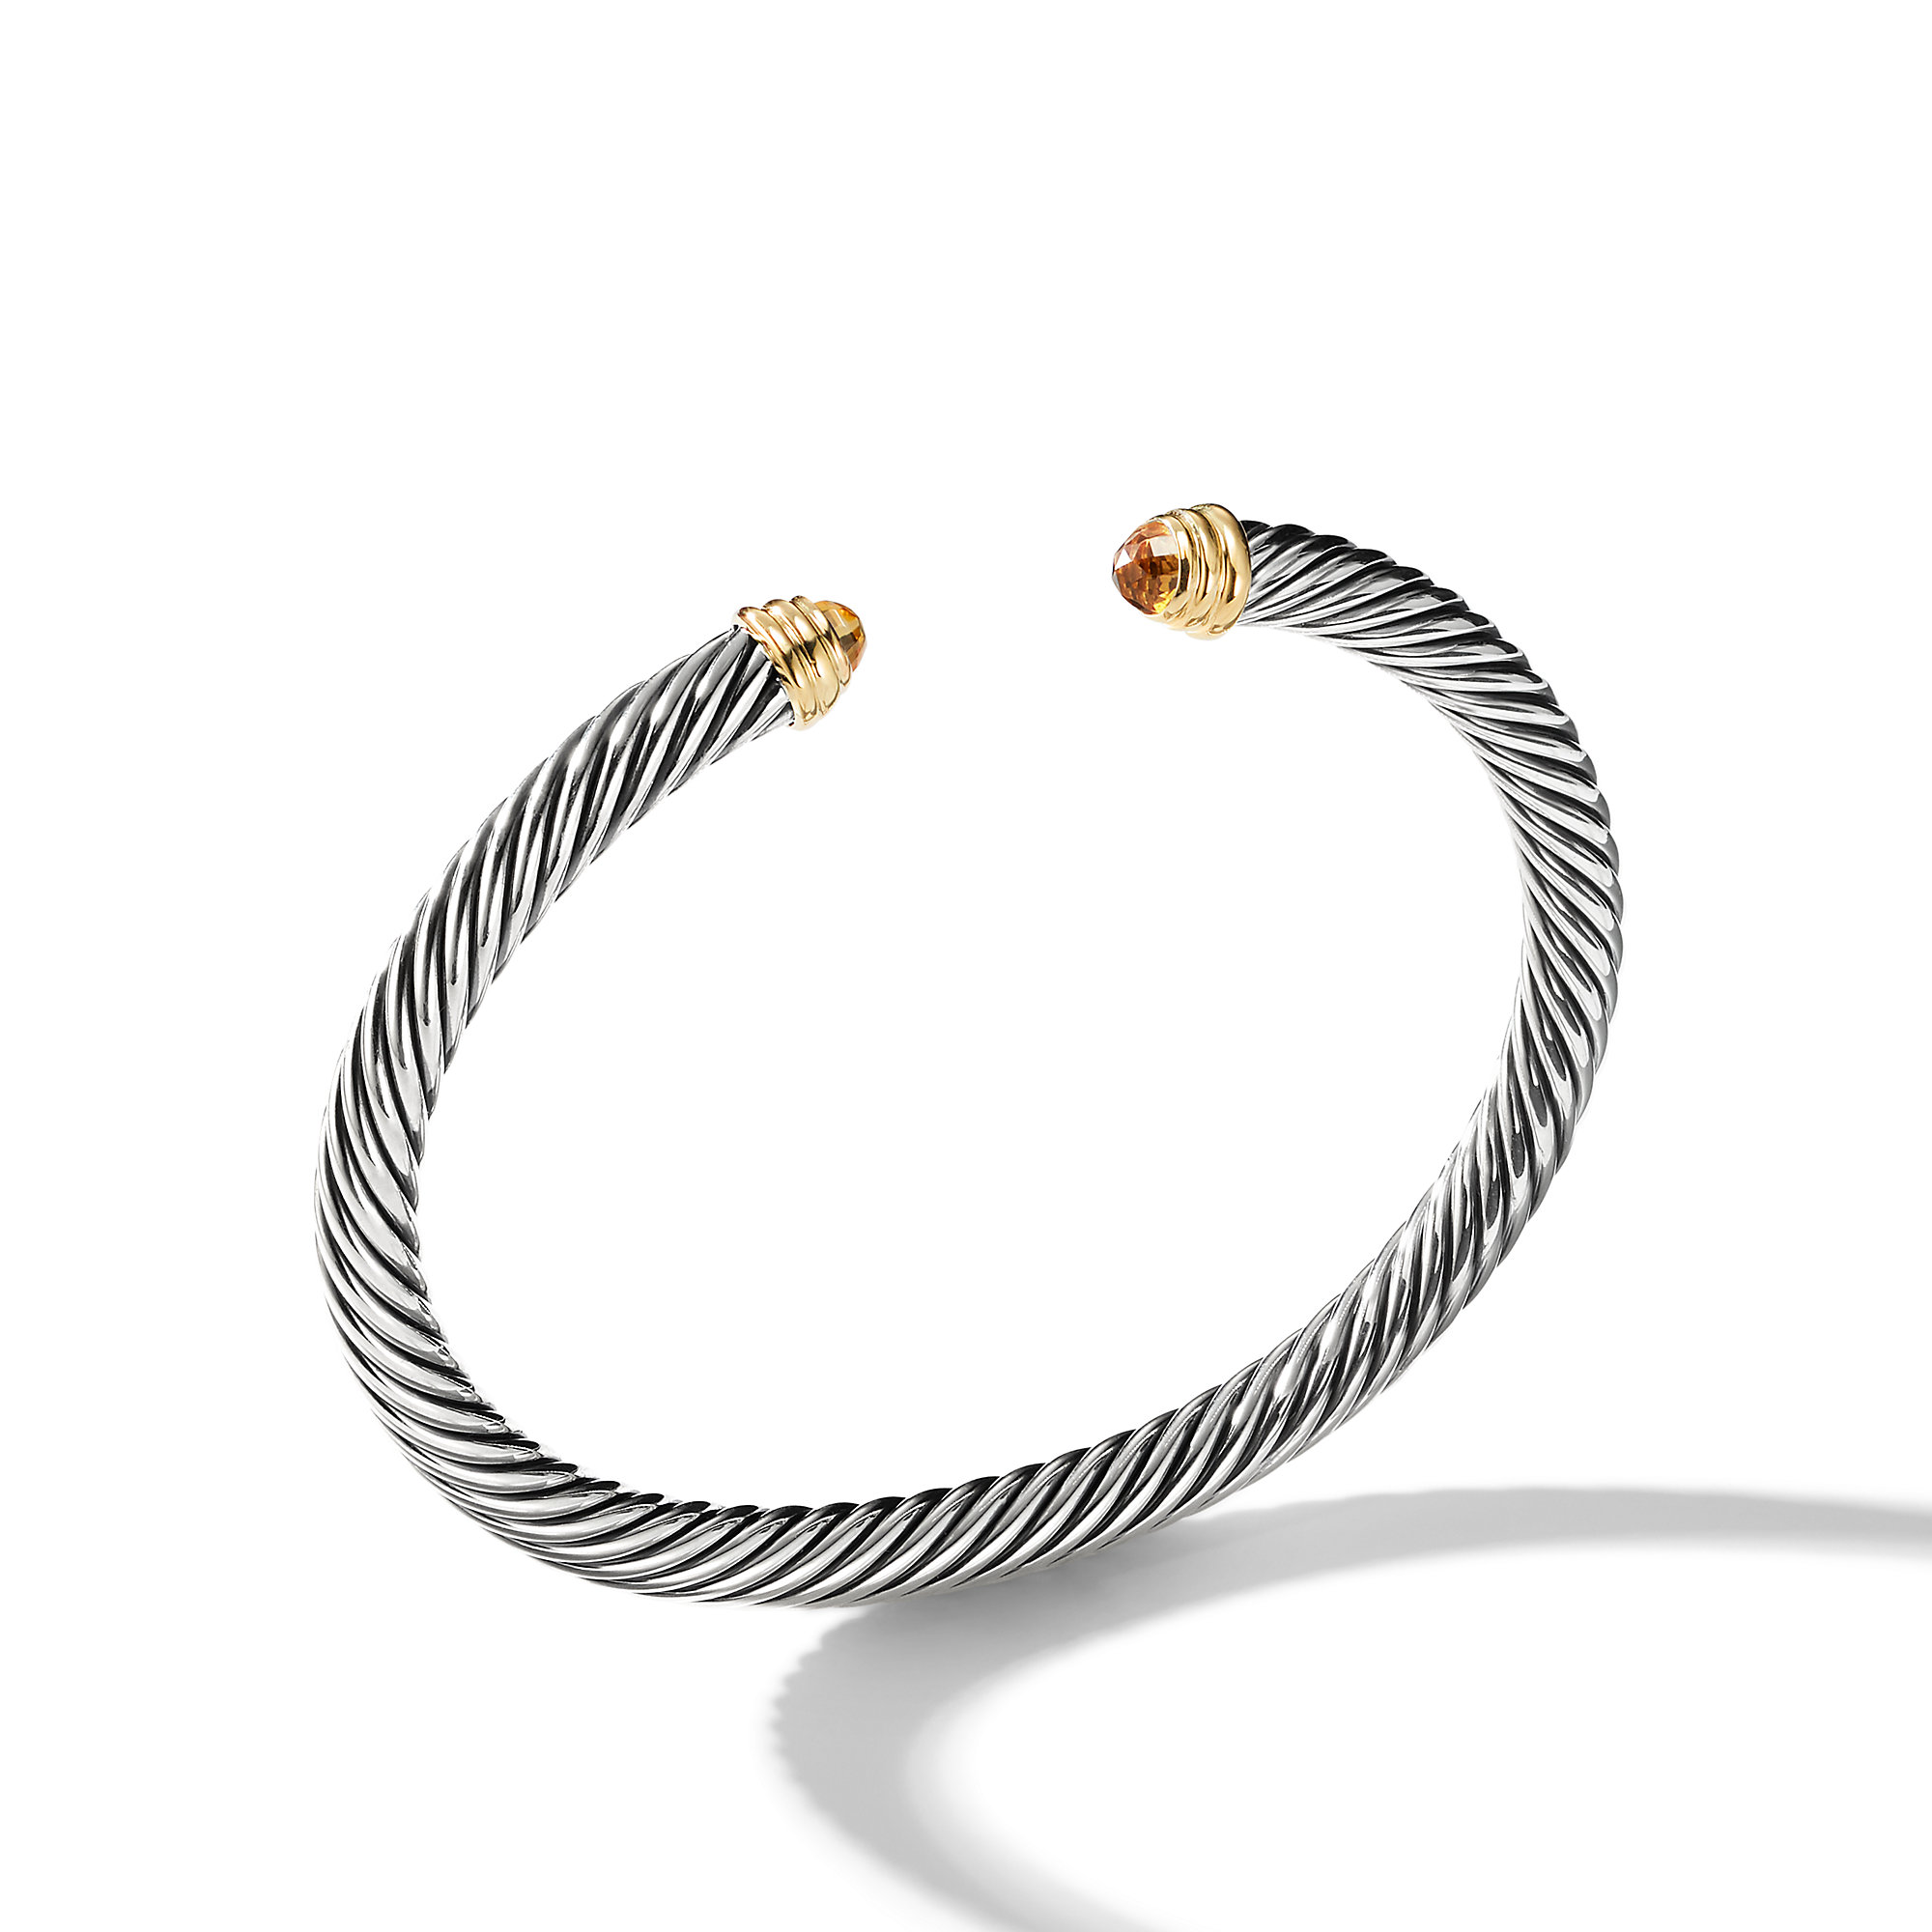 Cable Classics Collection® Bracelet with Citrine and 14K Gold